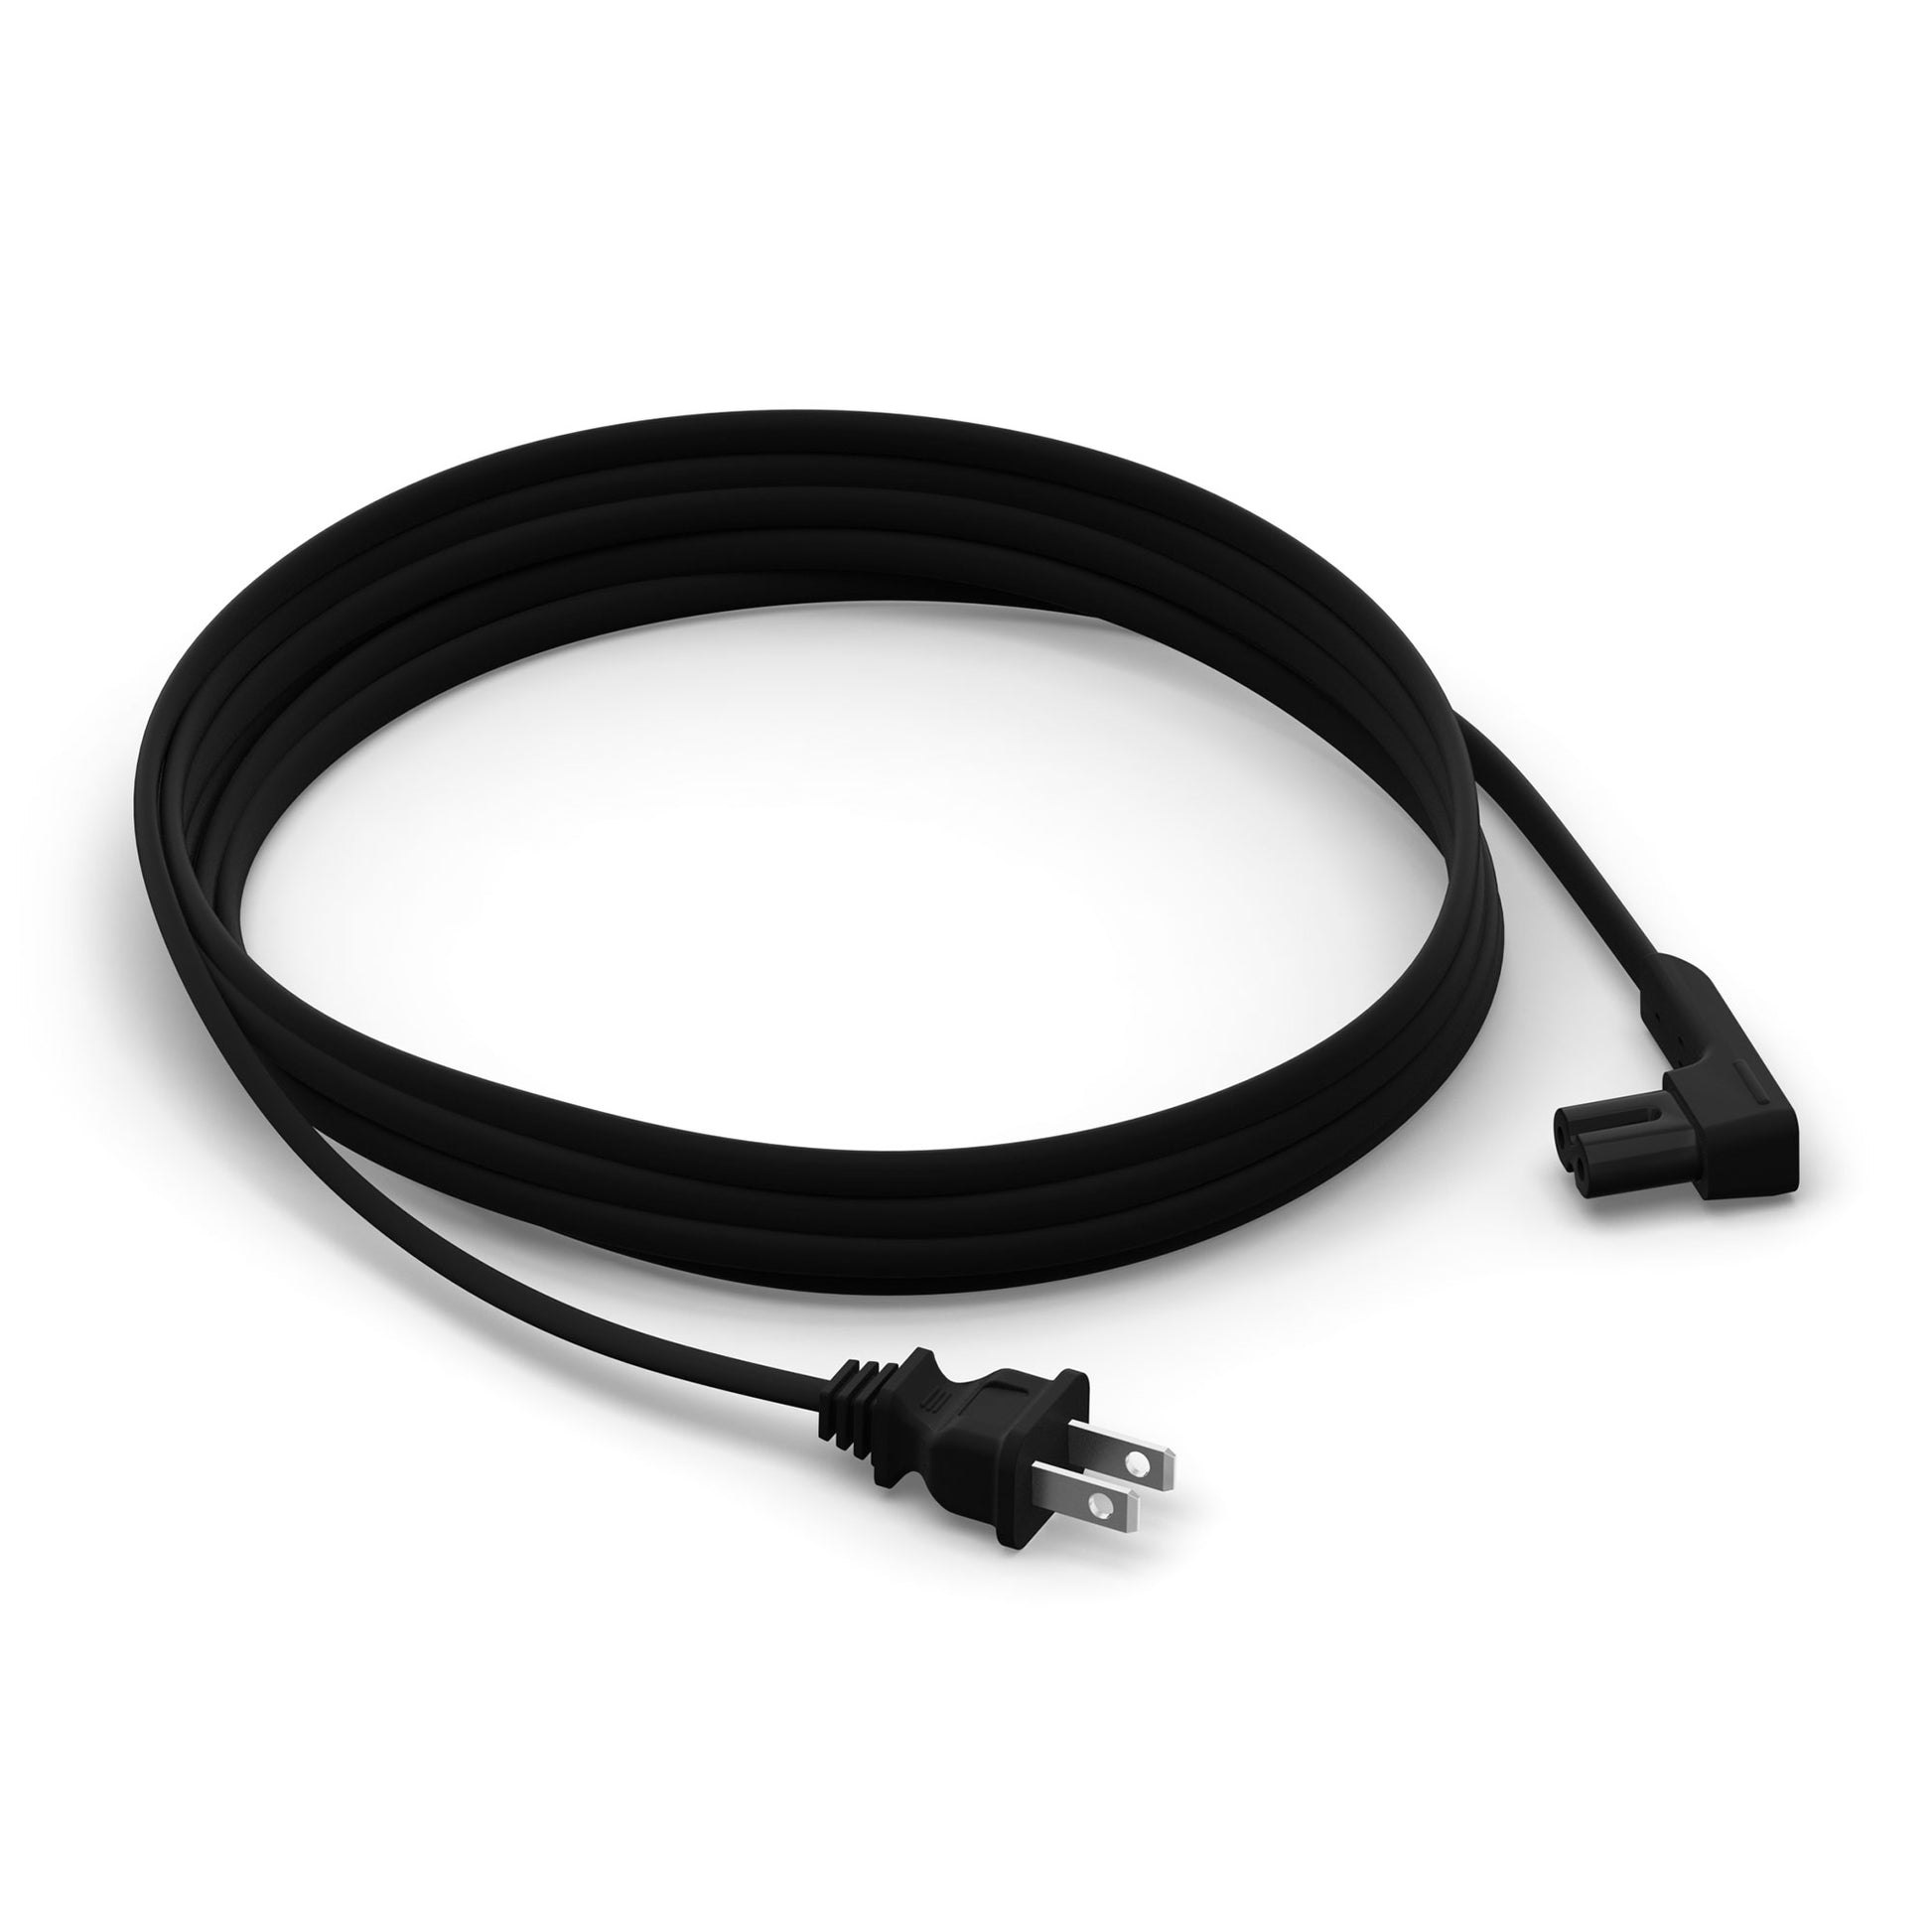 Sonos 11.5ft power cable (Black) - Top View